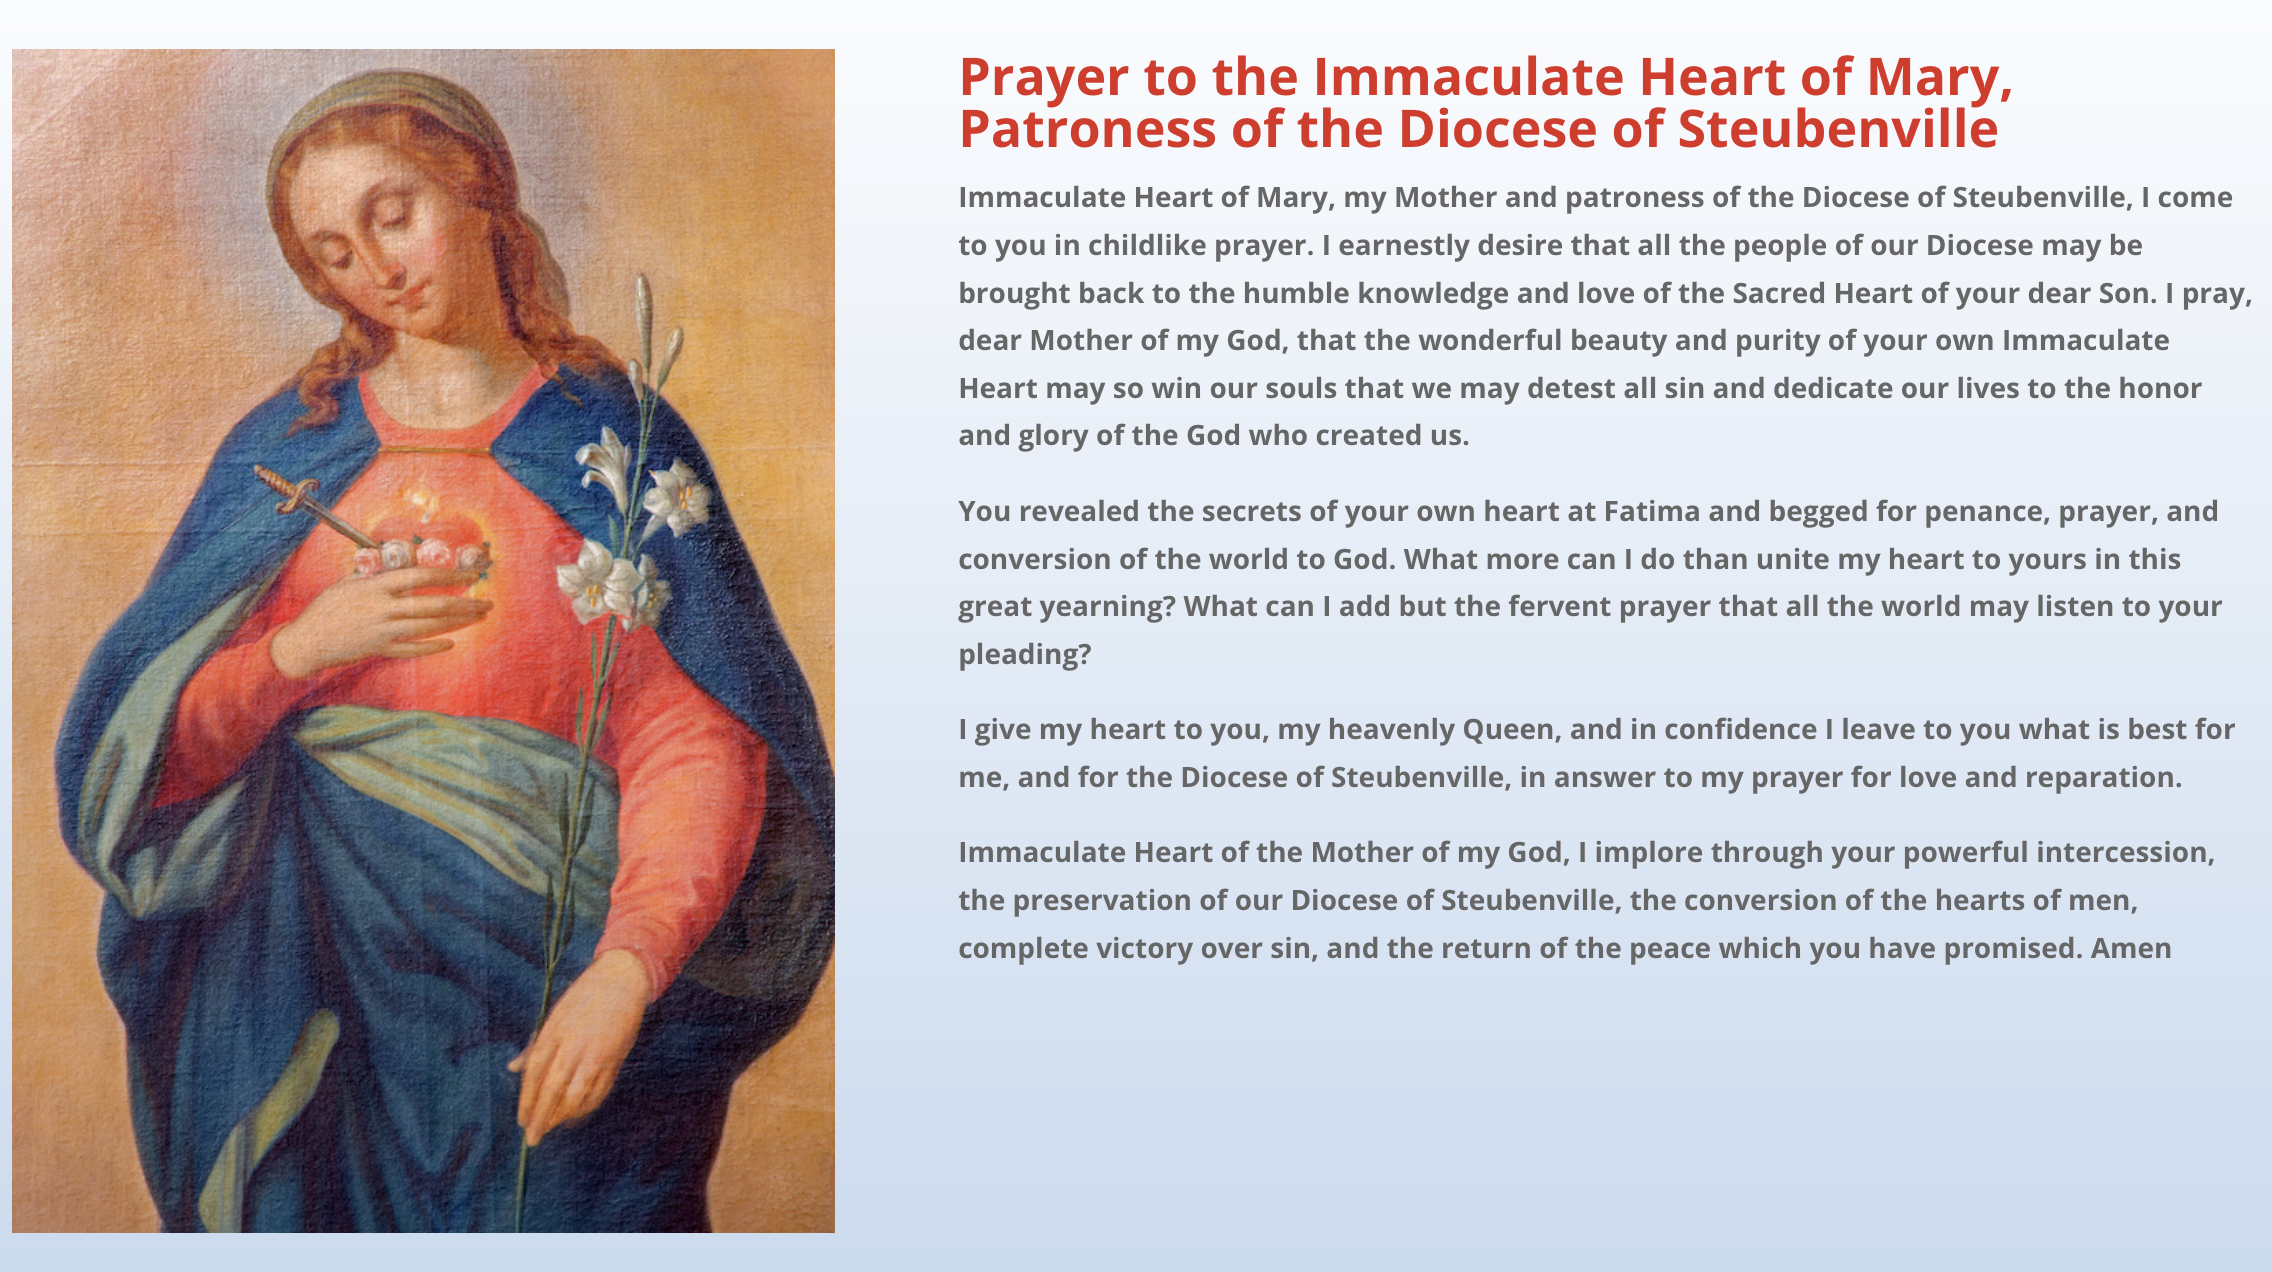 Prayer to the Immaculate Heart for the Diocese of Steubenville